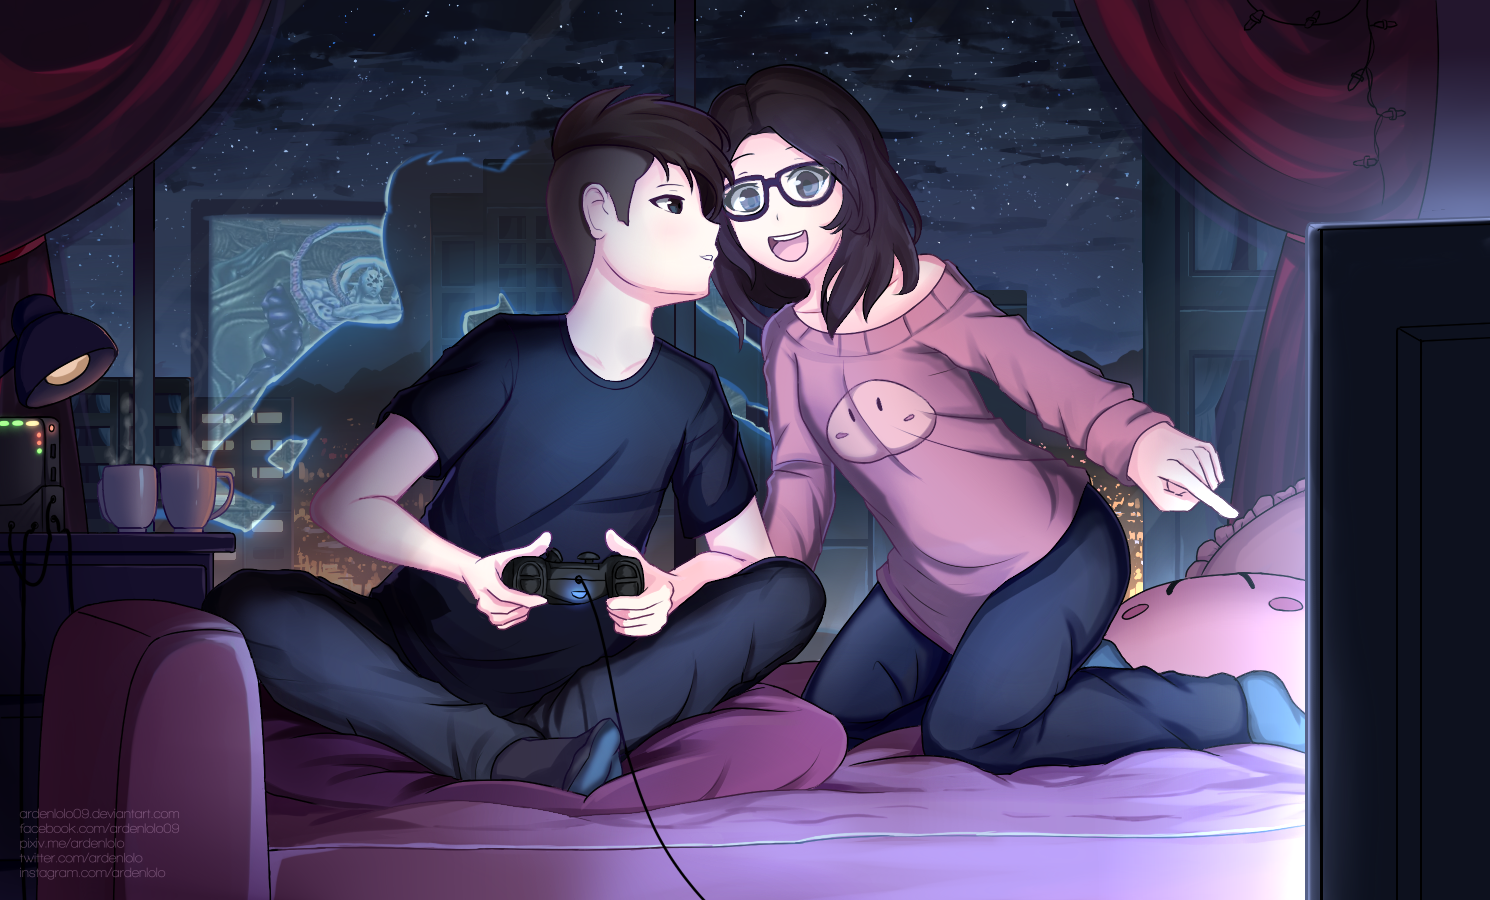 Gamer Couple-Commission情侣